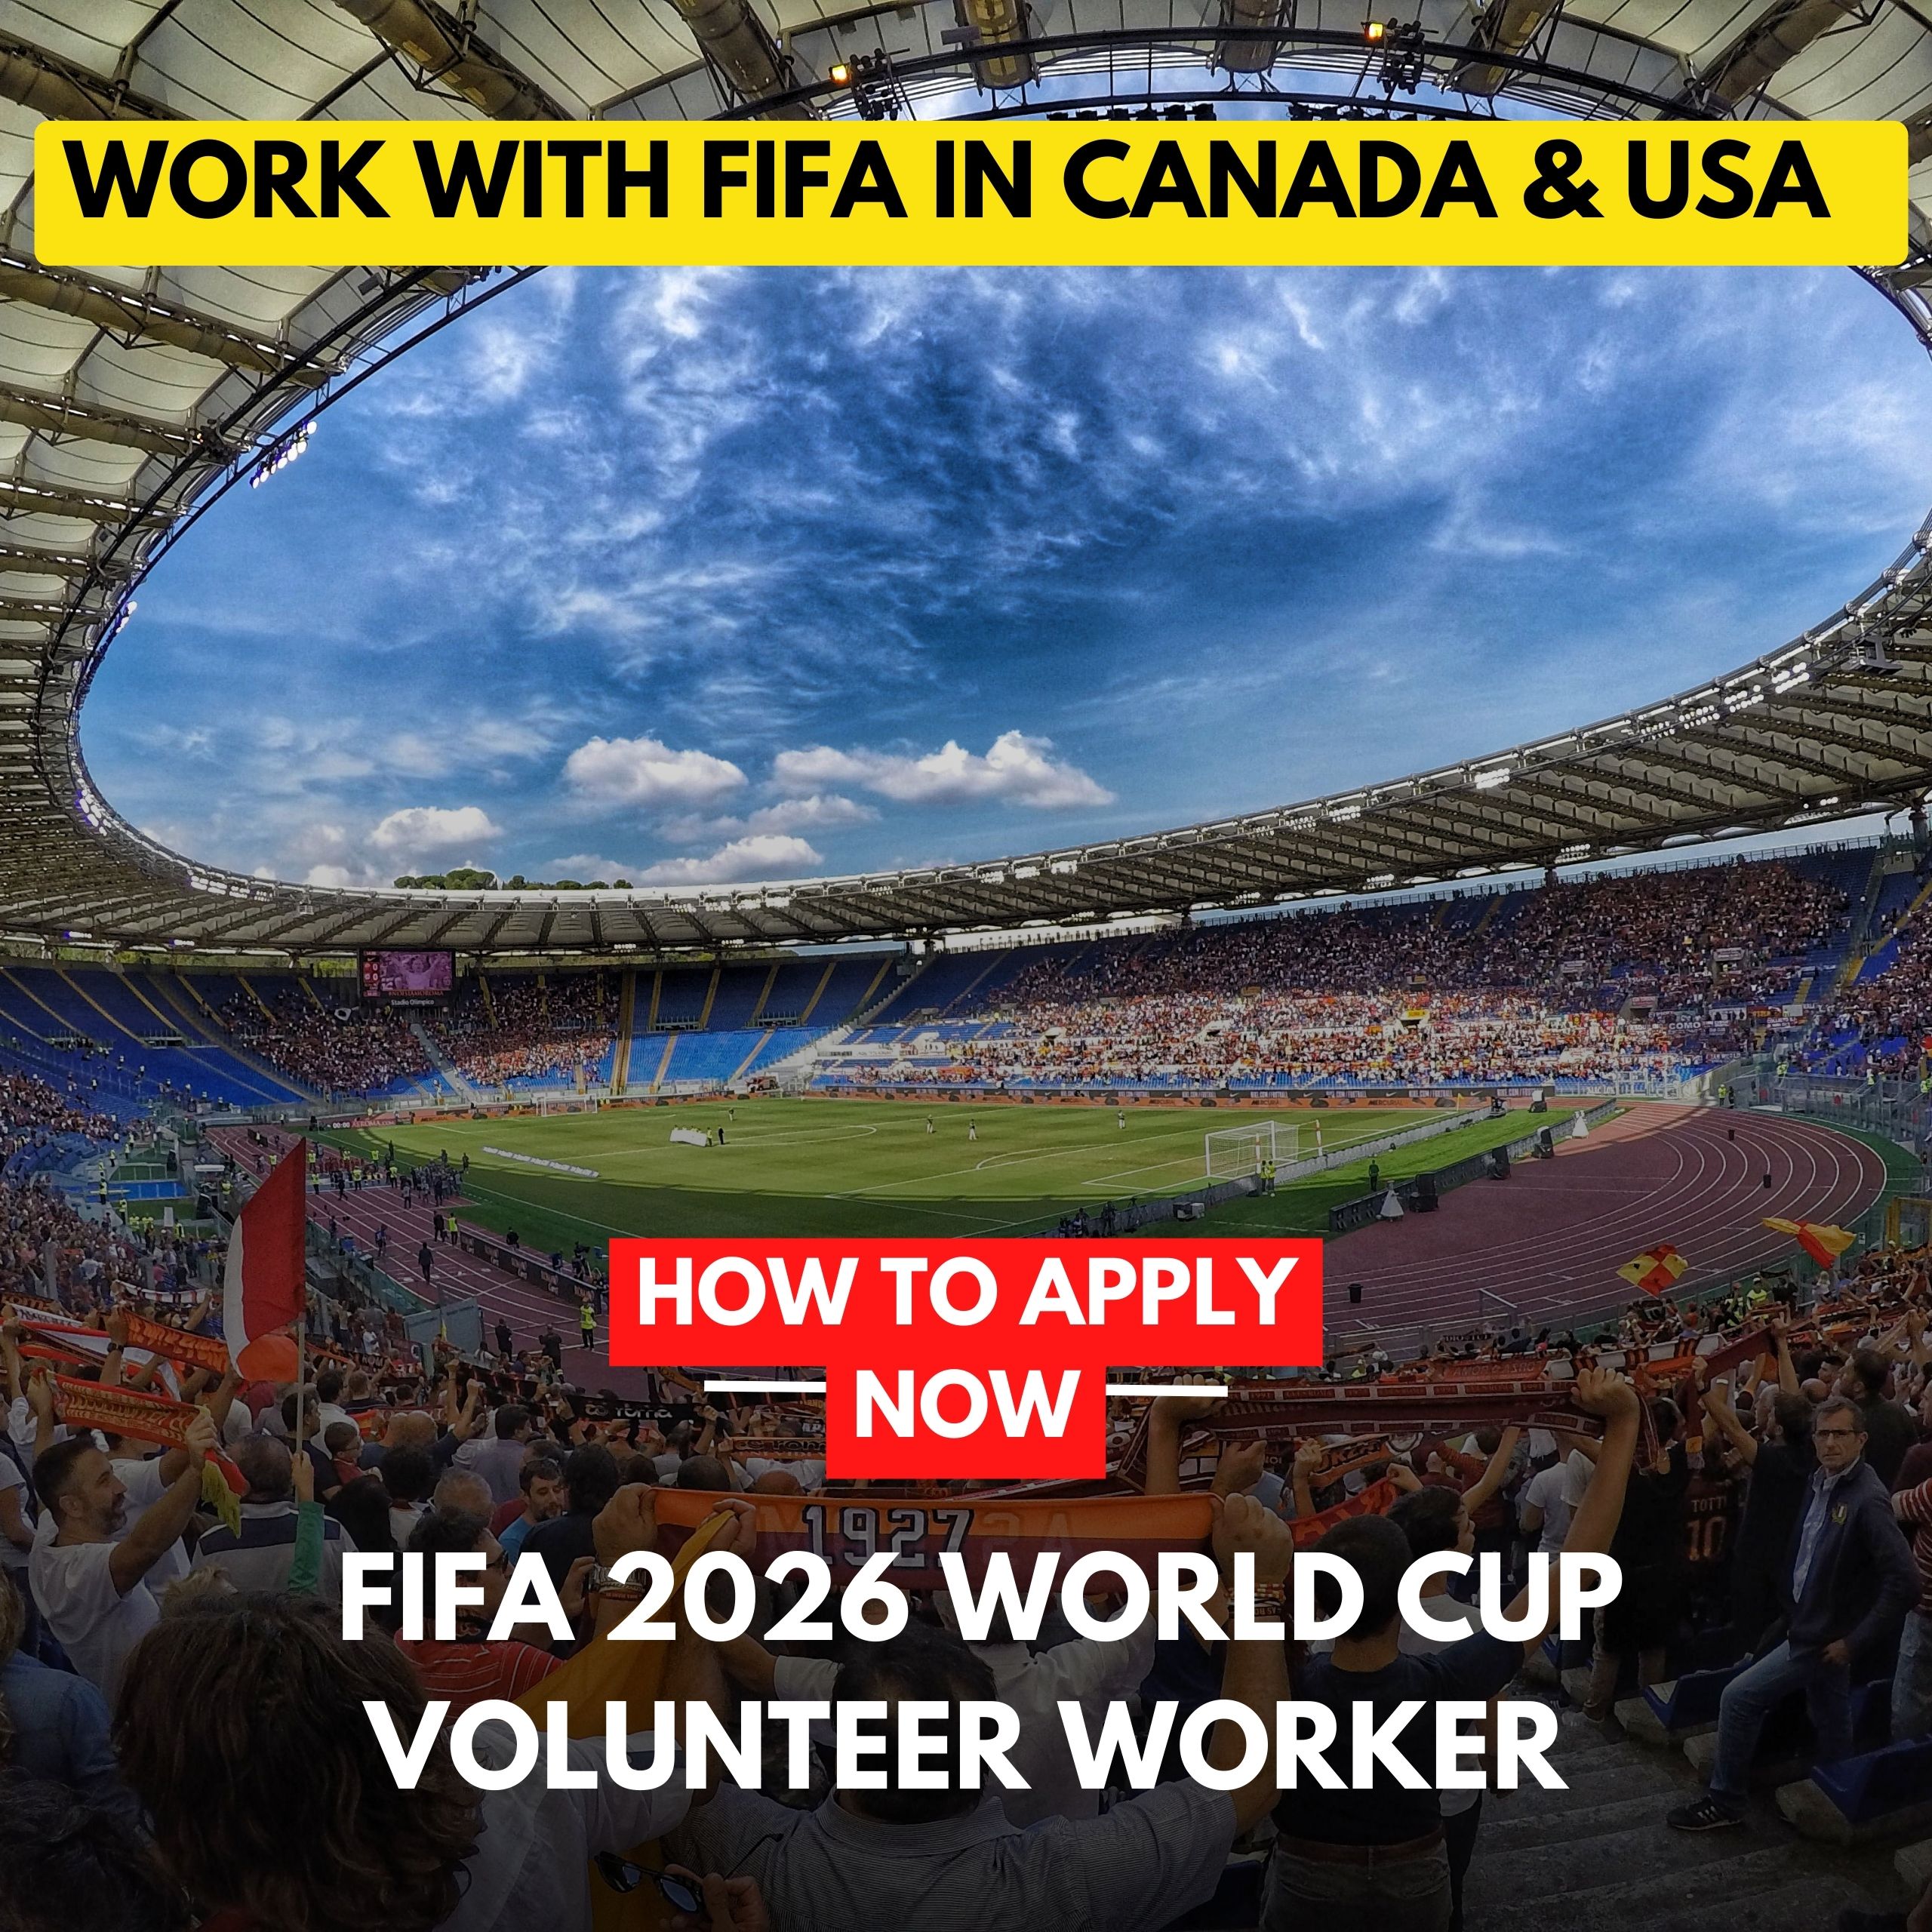 Travel to Canada & USA by Volunteering for the 2026 World Cup